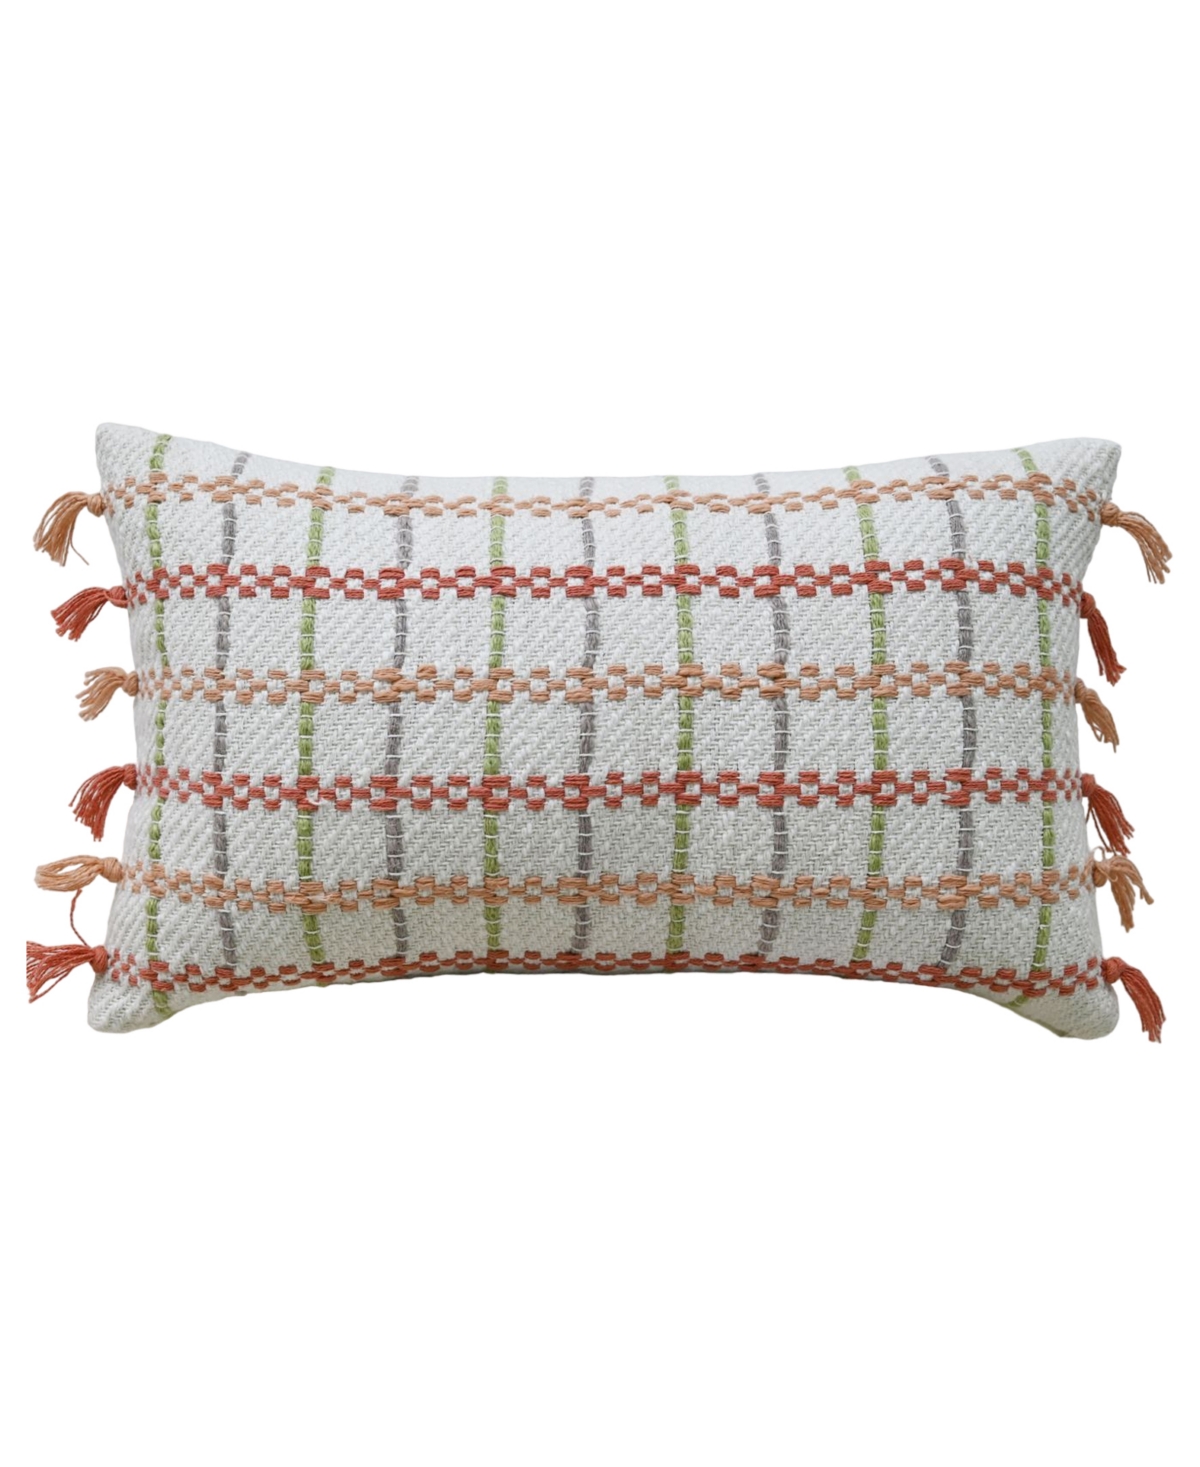 Shop Vibhsa Linden Street Handwoven Knotted Edging Decorative Pillow, 14" X 24" In Multi Color